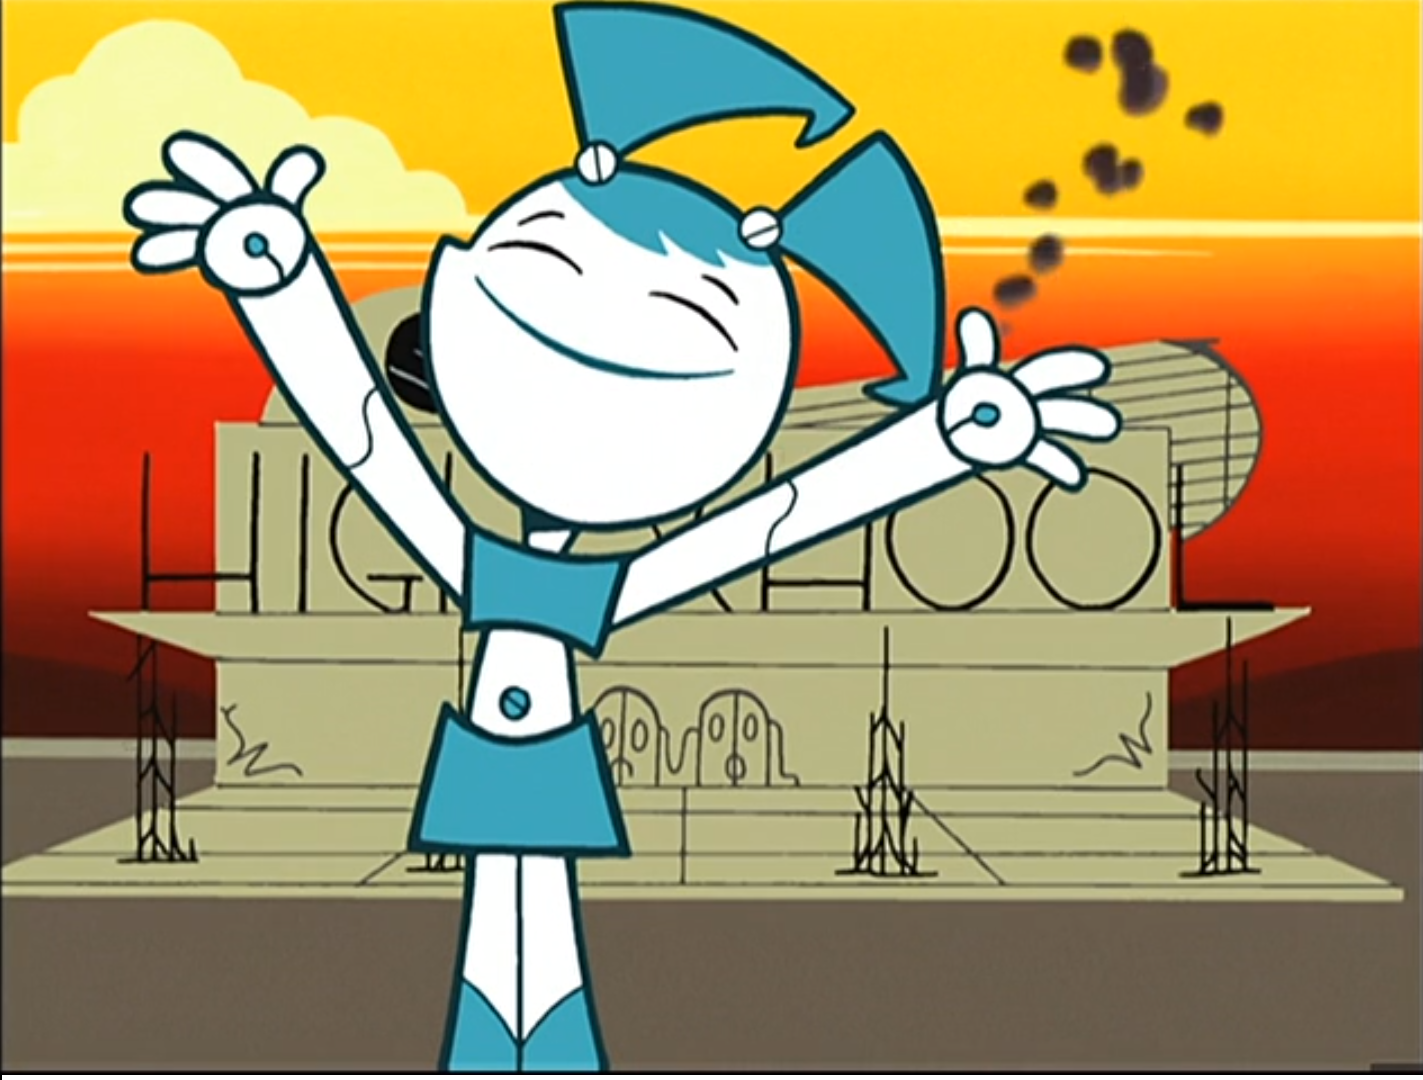 The character Jenny in front of her high school with a big smile and her arms in the air.